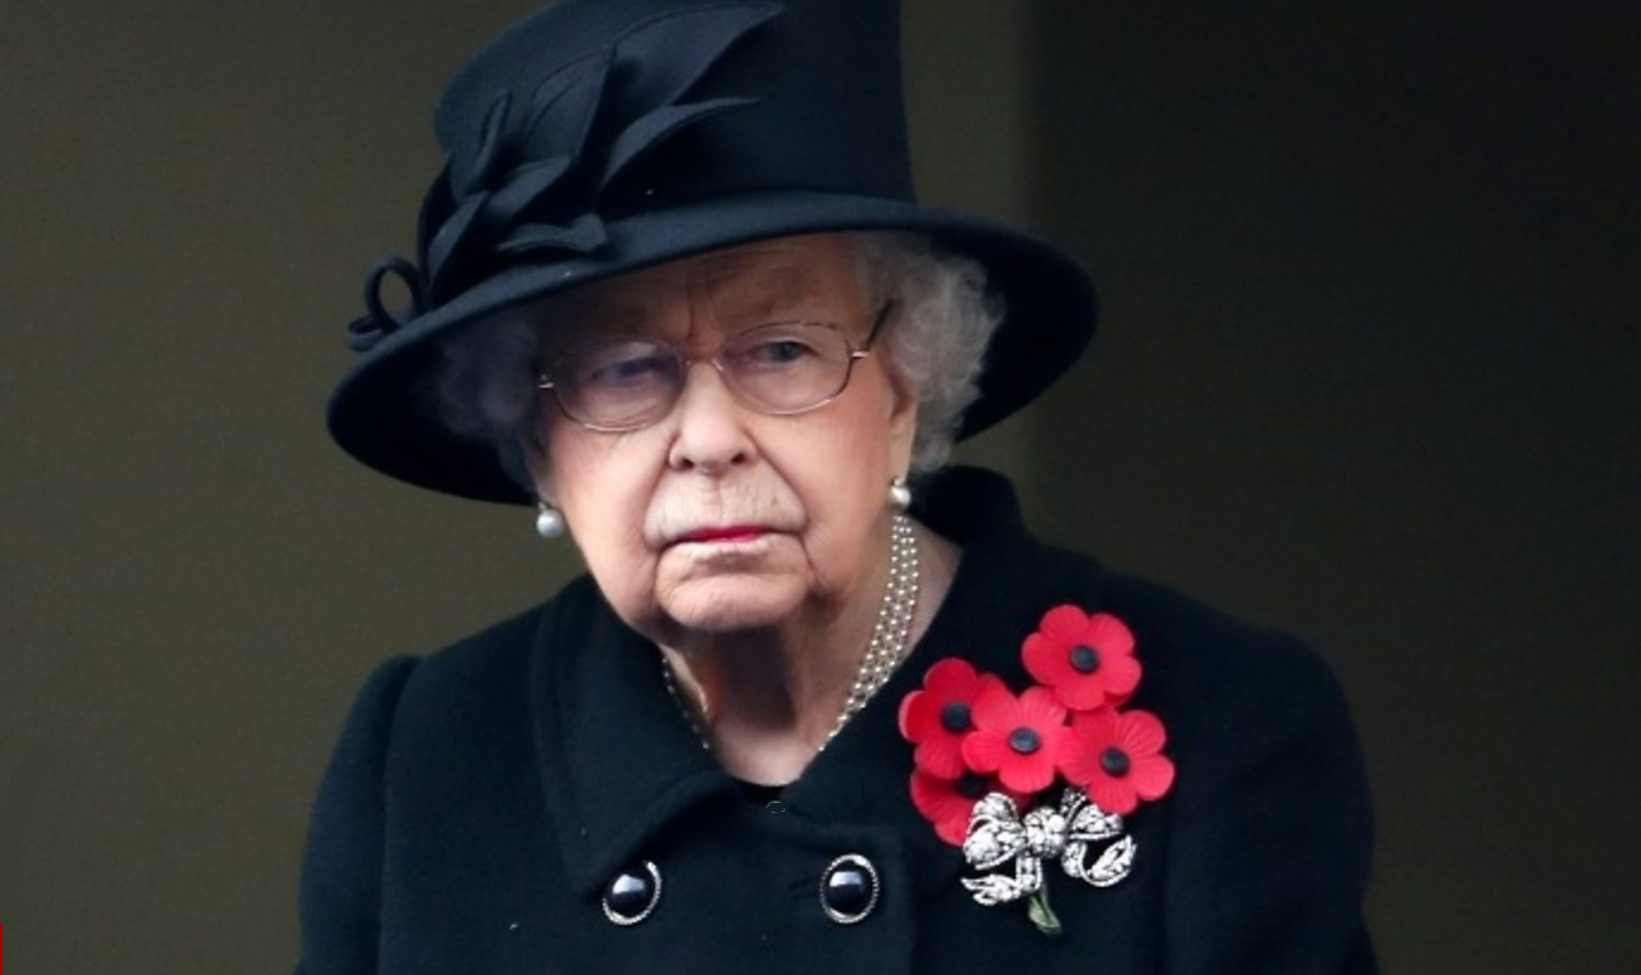 Queen Elizabeth watched the ceremony from a nearby balcony